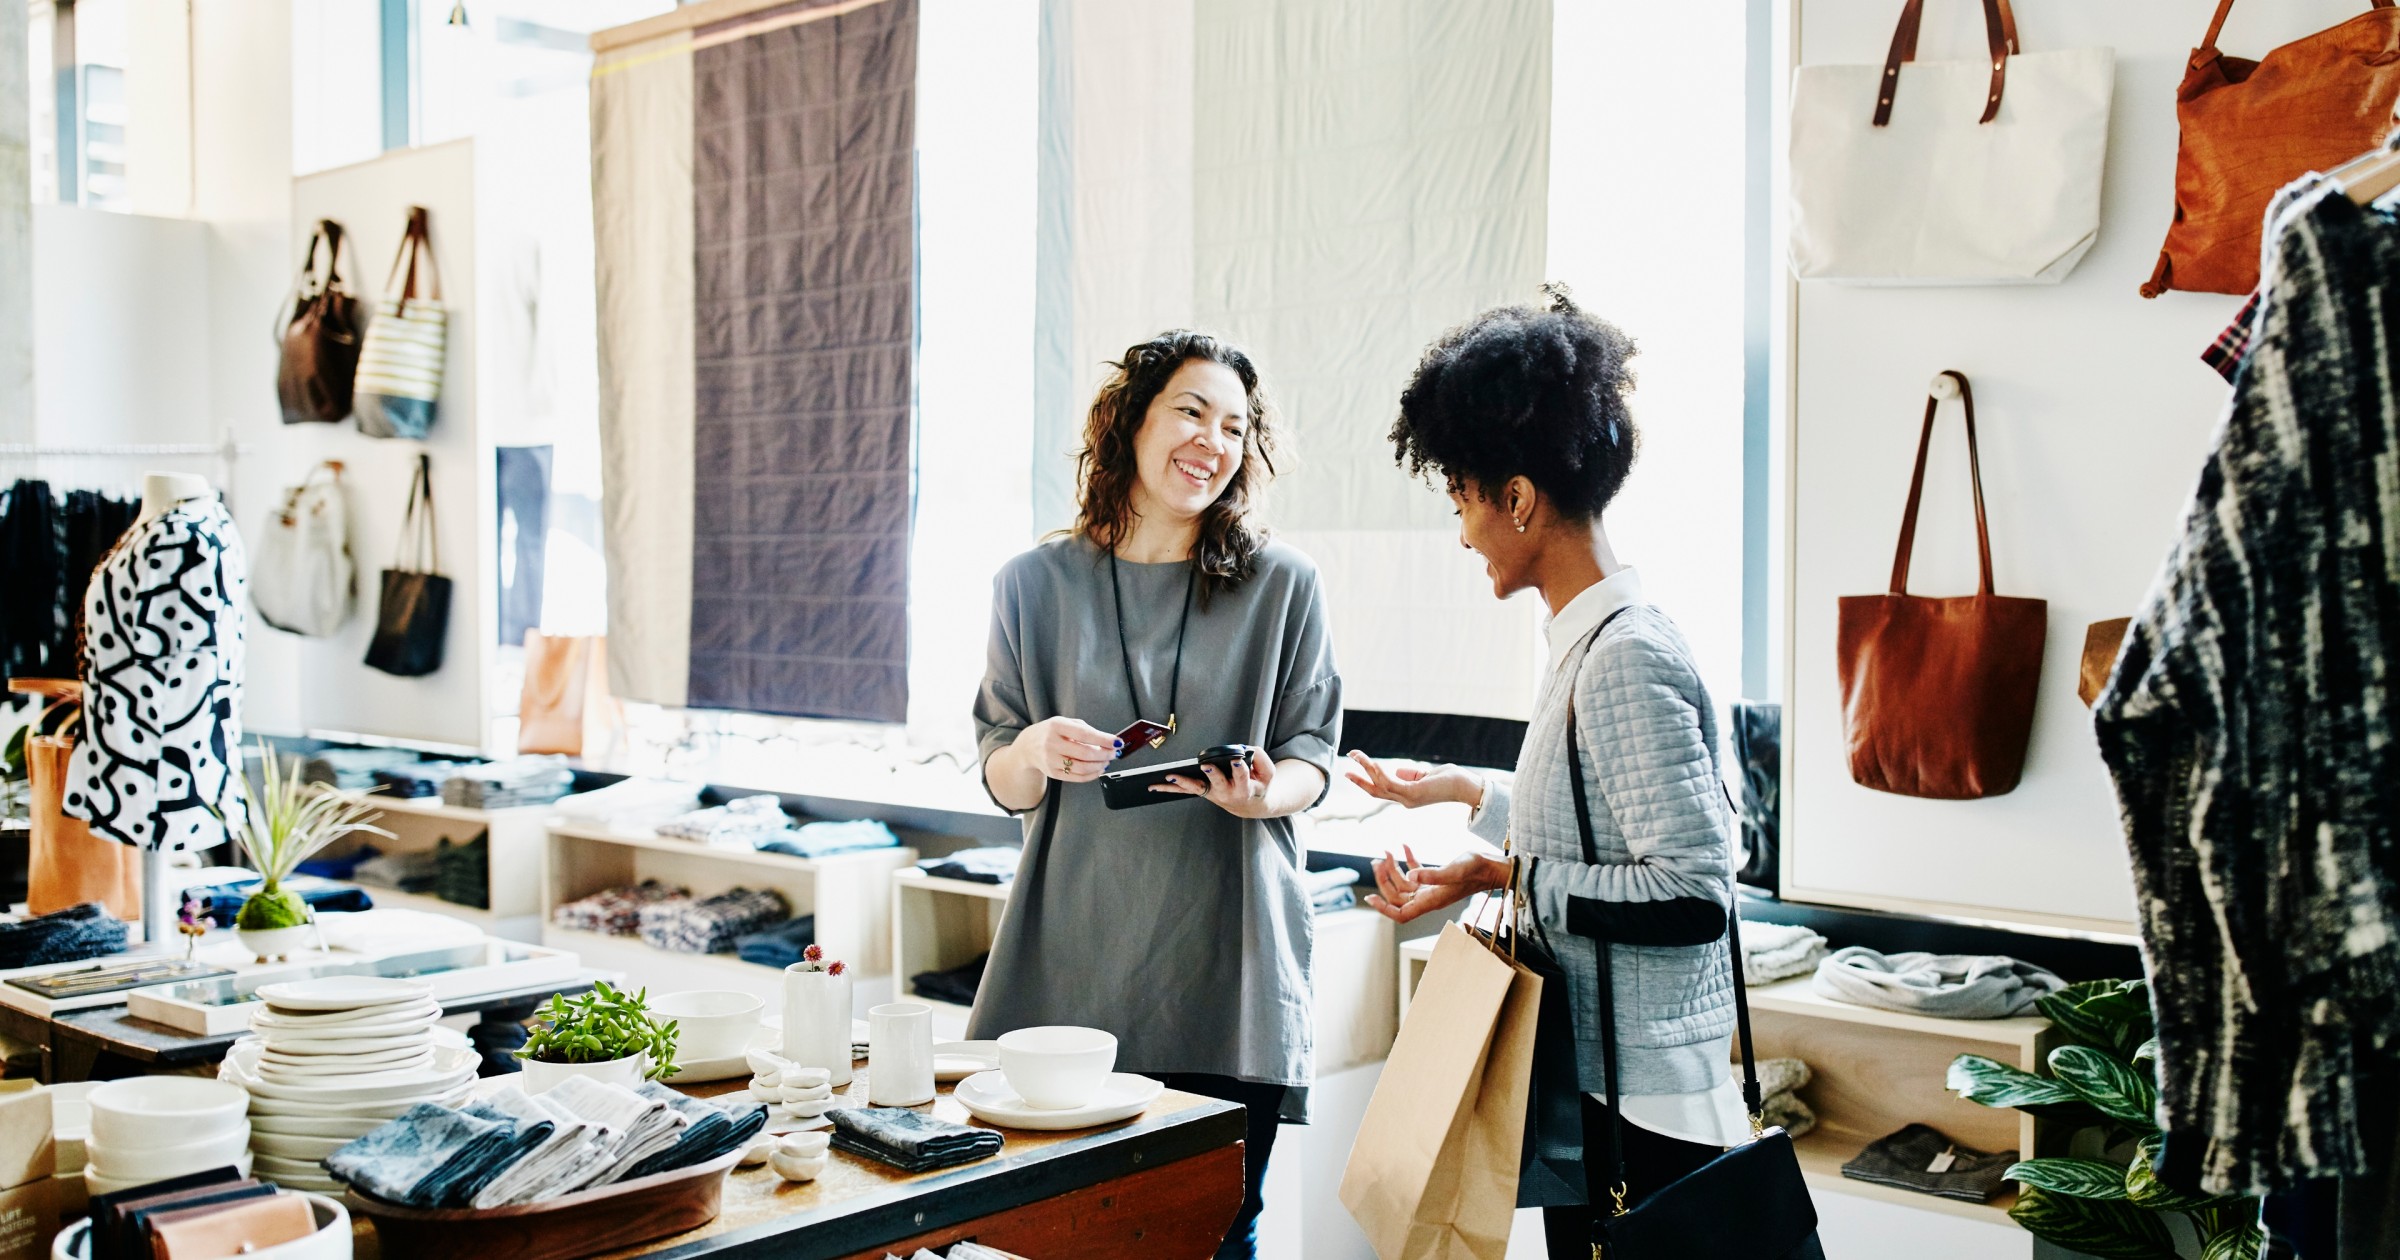 Retail technology and frontline workers: Delivering unforgettable customer experiences